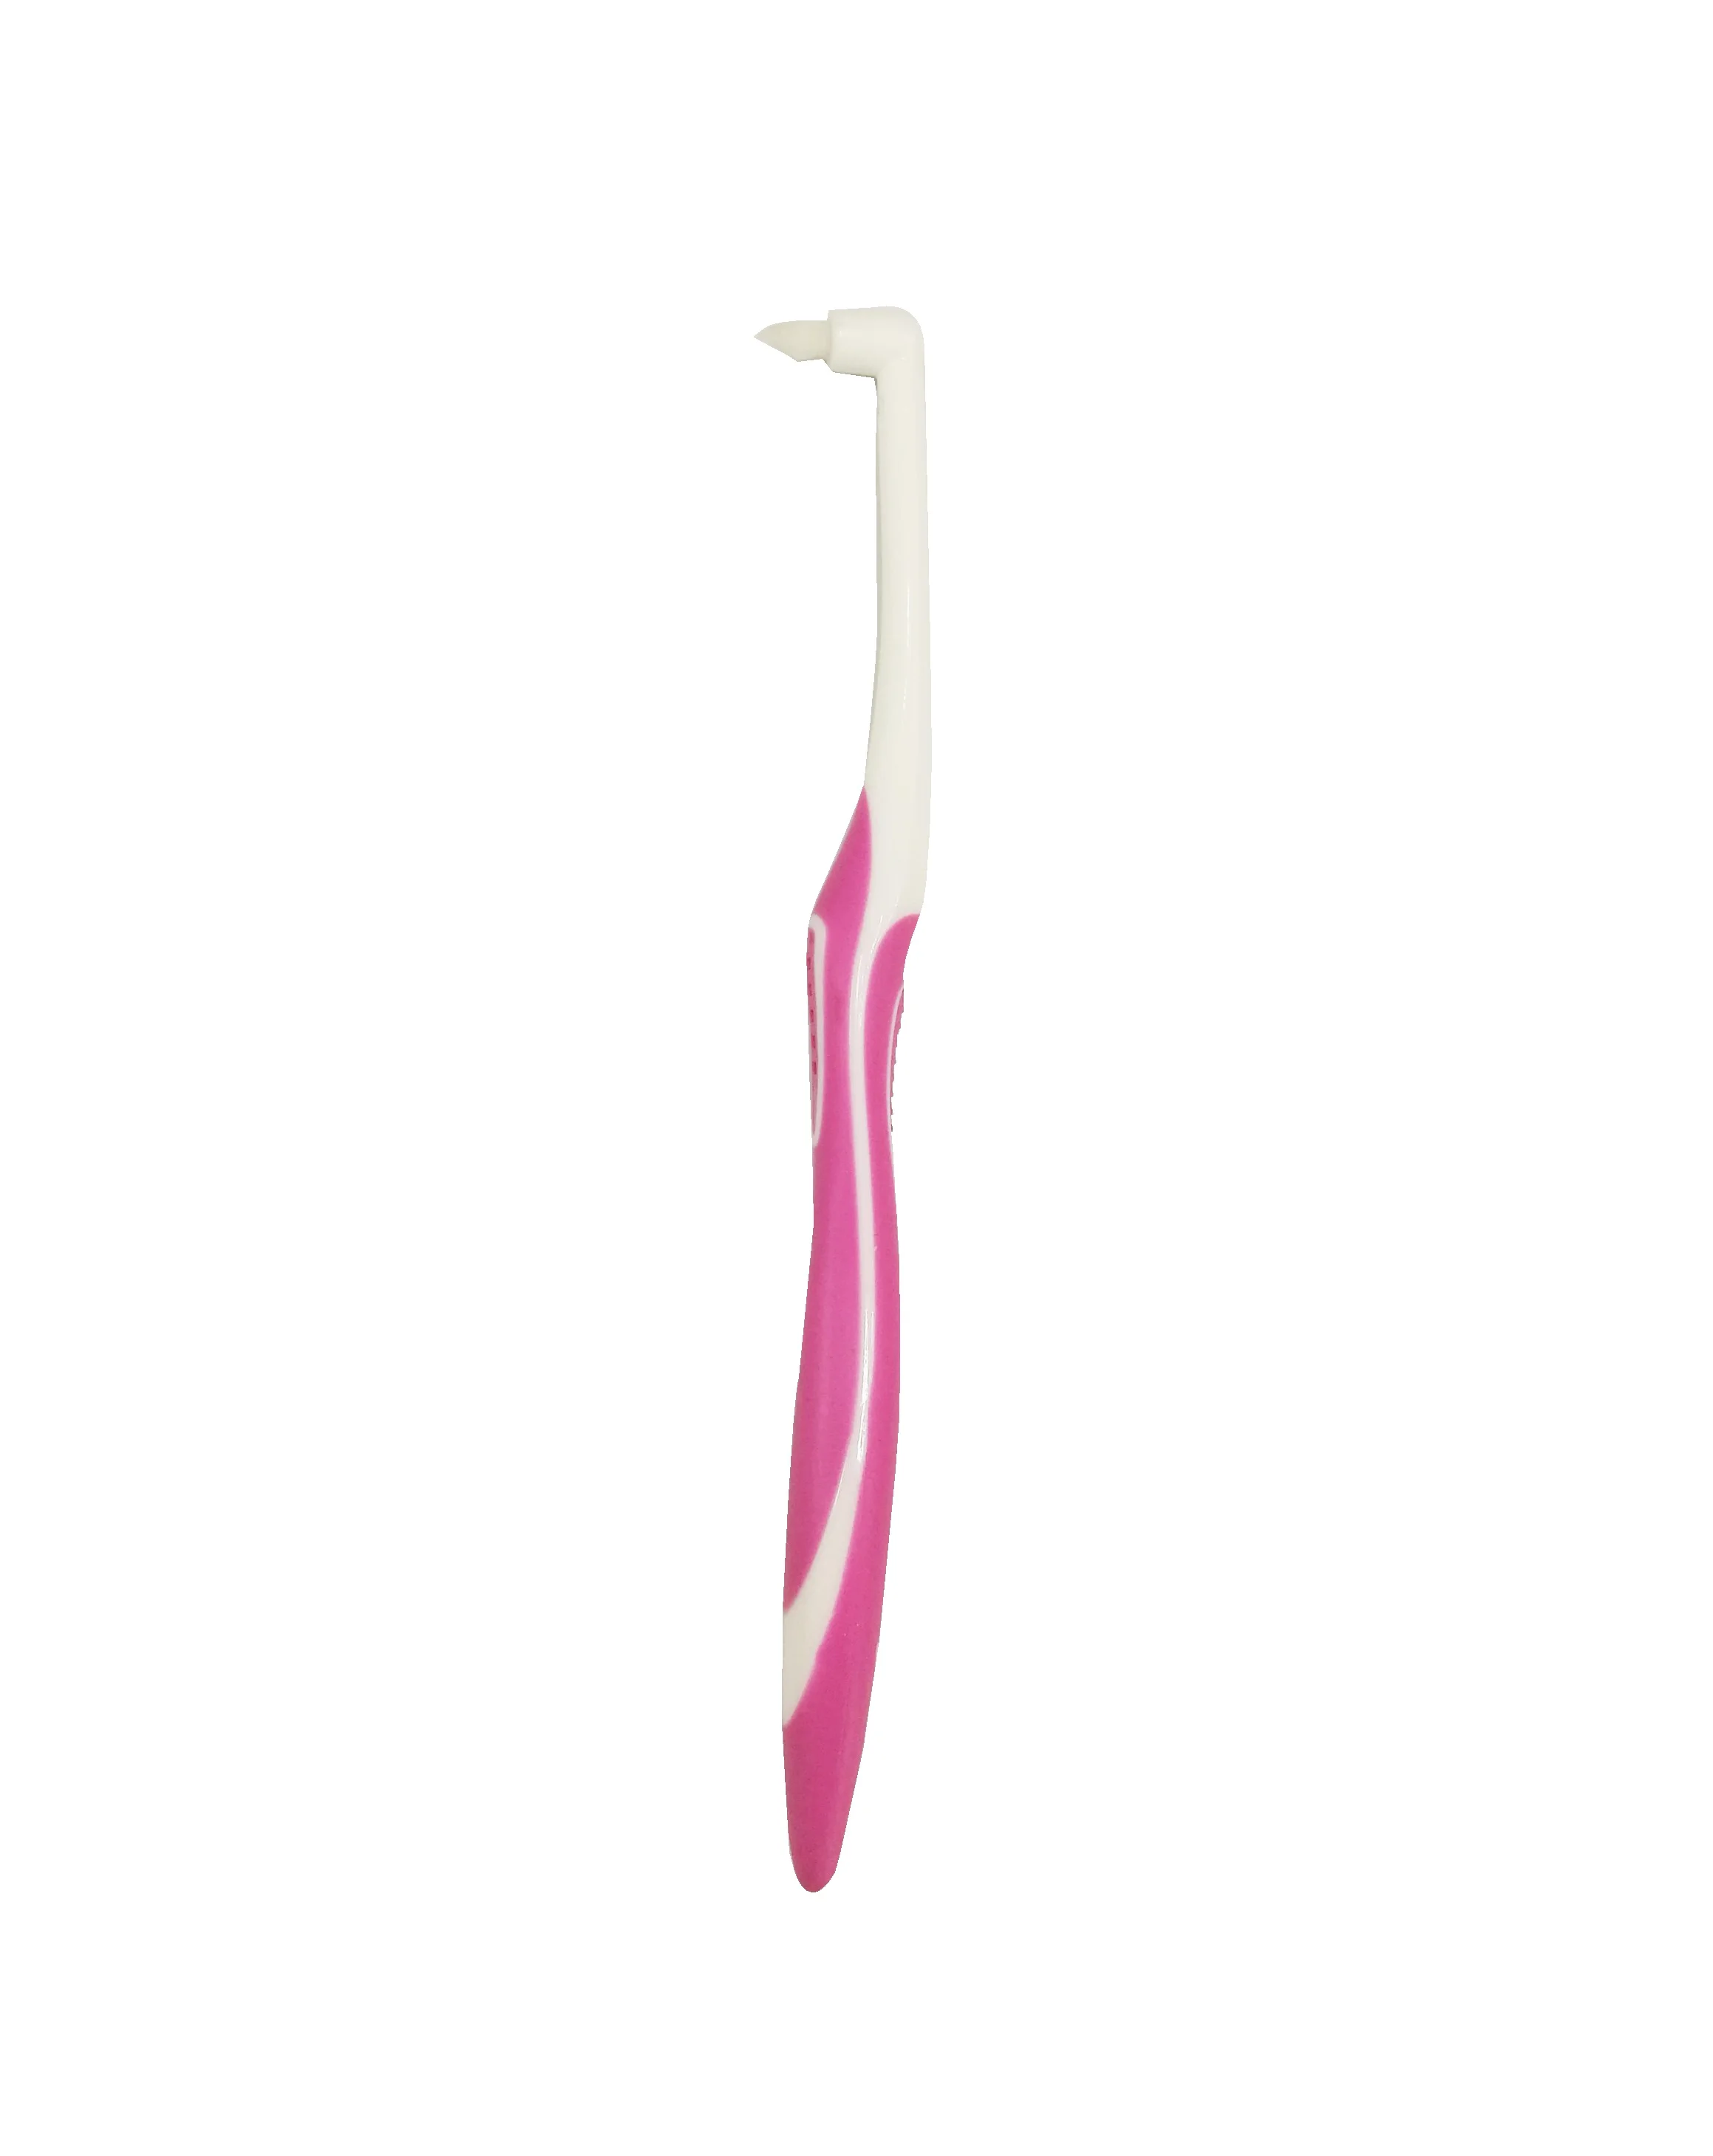 High quality interspace end tuft tooth brush